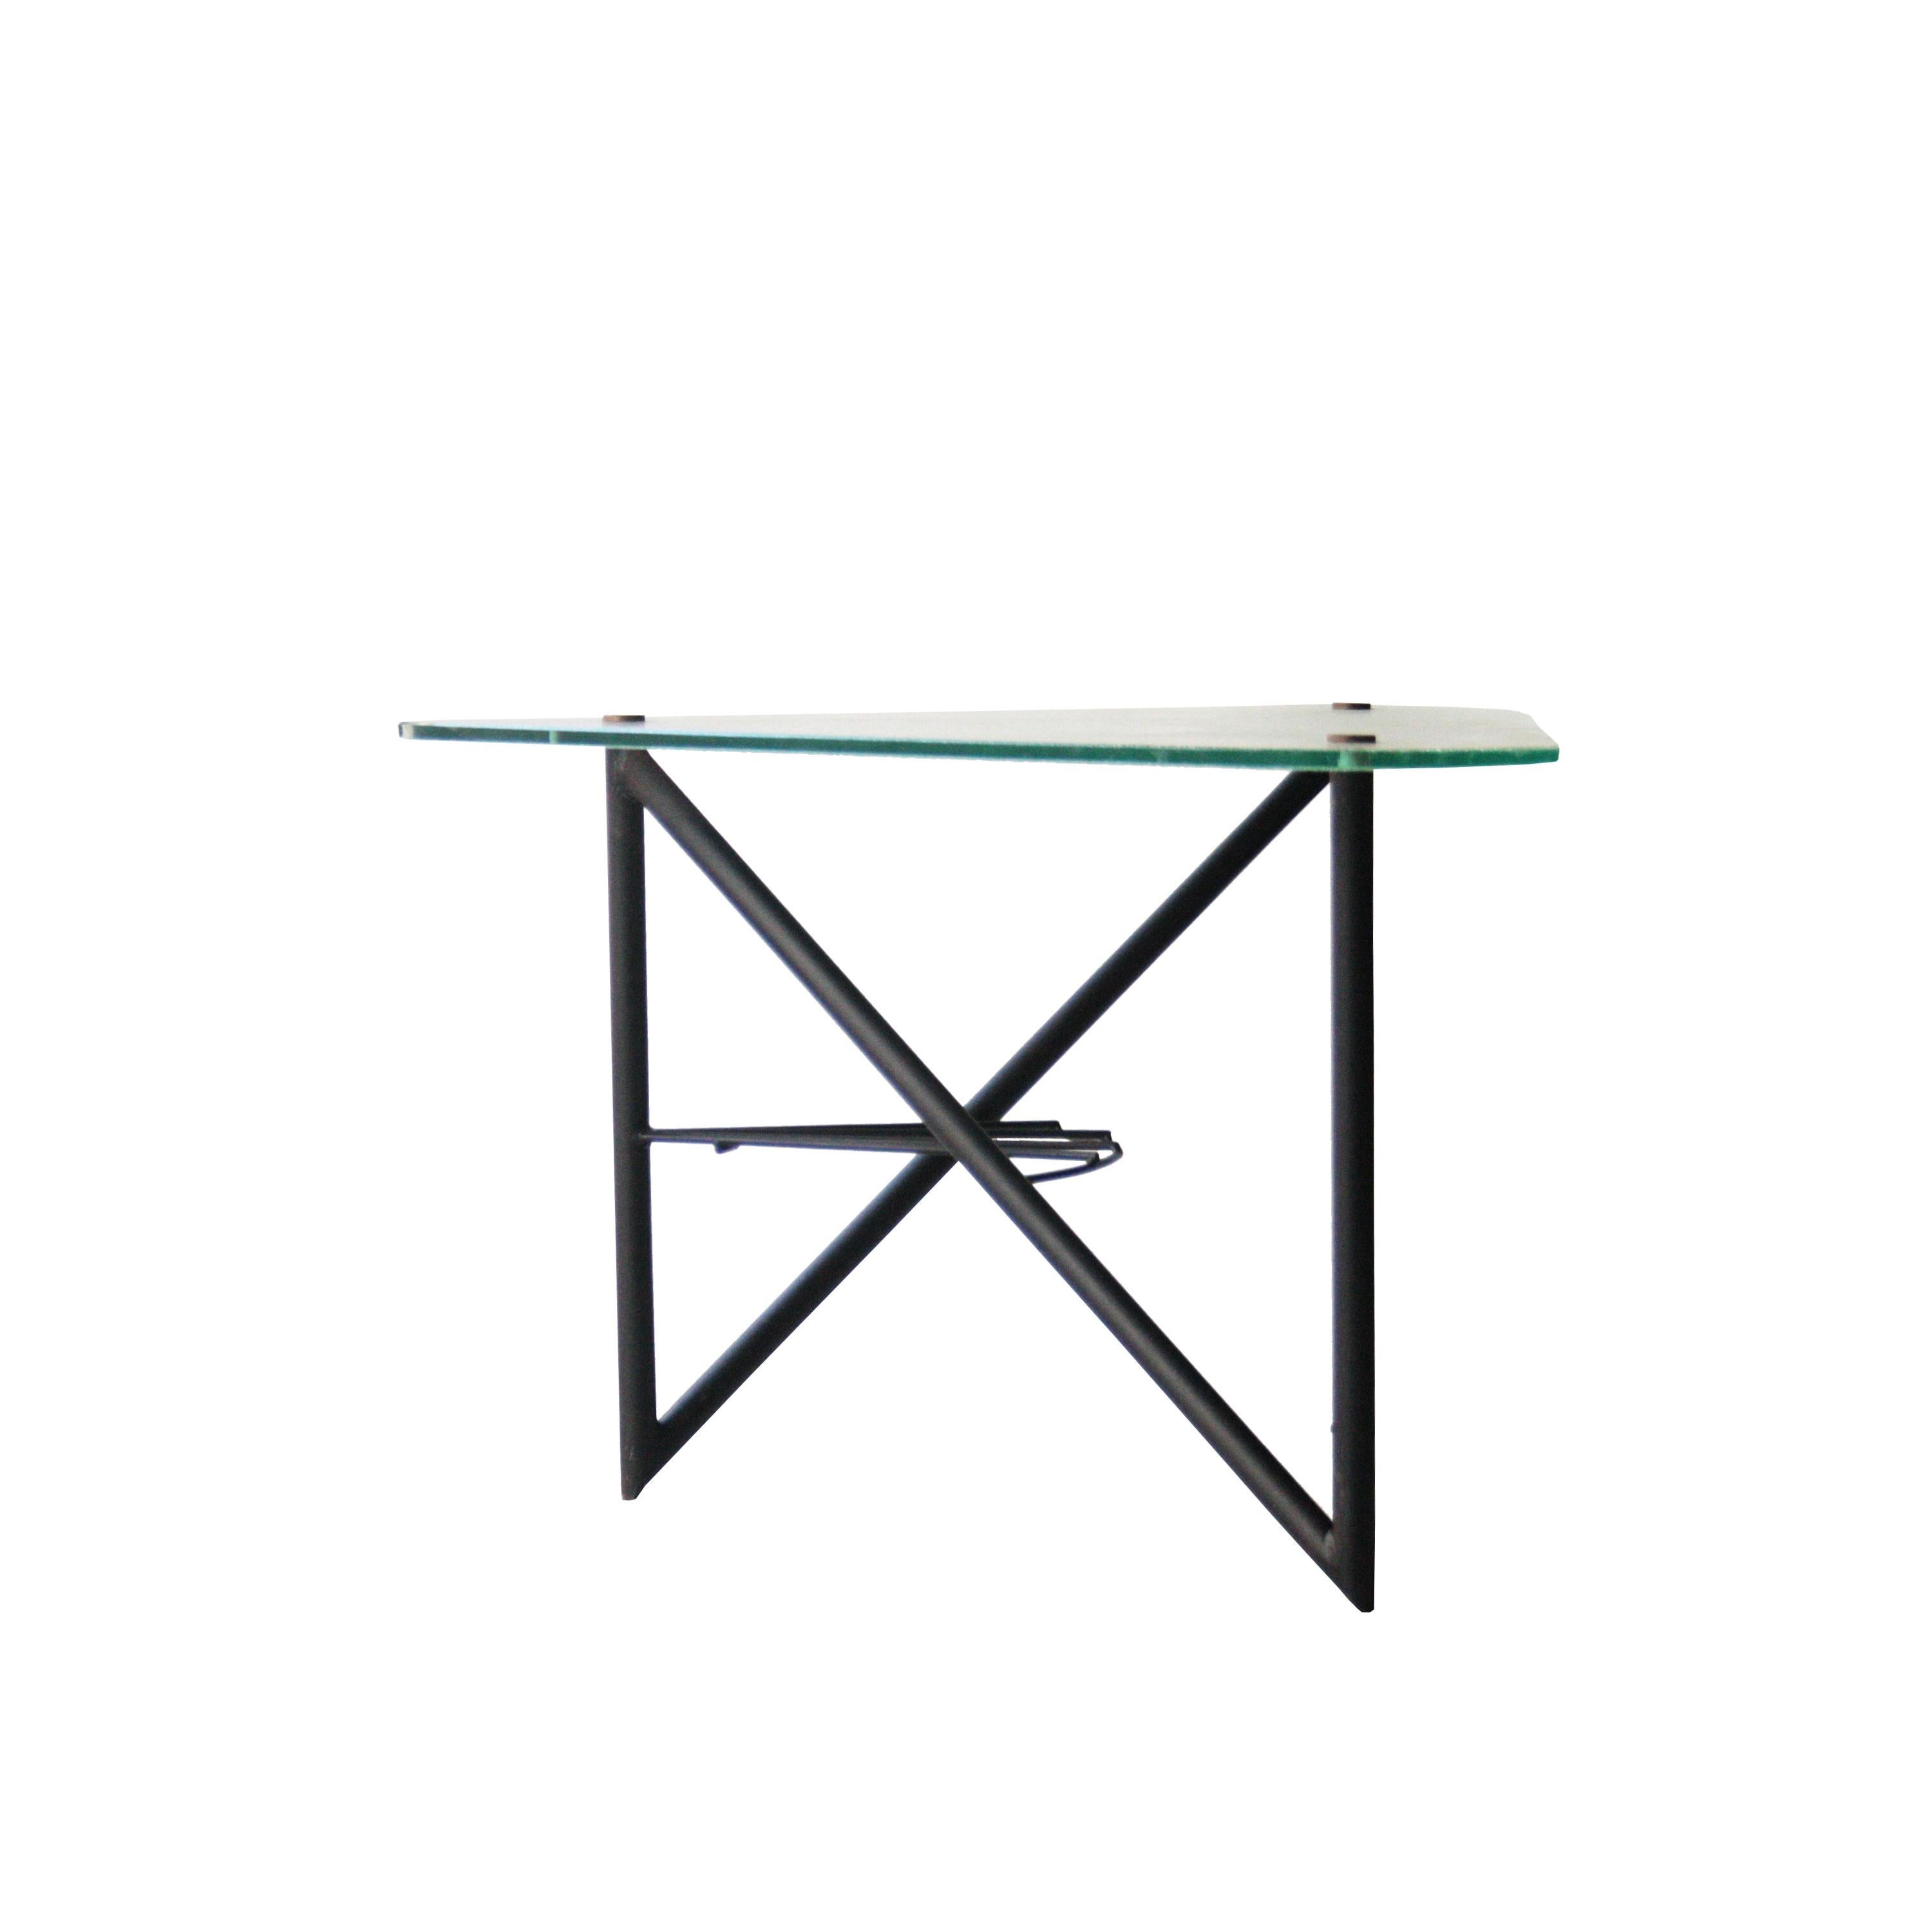 After Louis Sognot Triangular Metal Frossted Glass French Coffee Table, 1950 In Good Condition For Sale In Madrid, ES